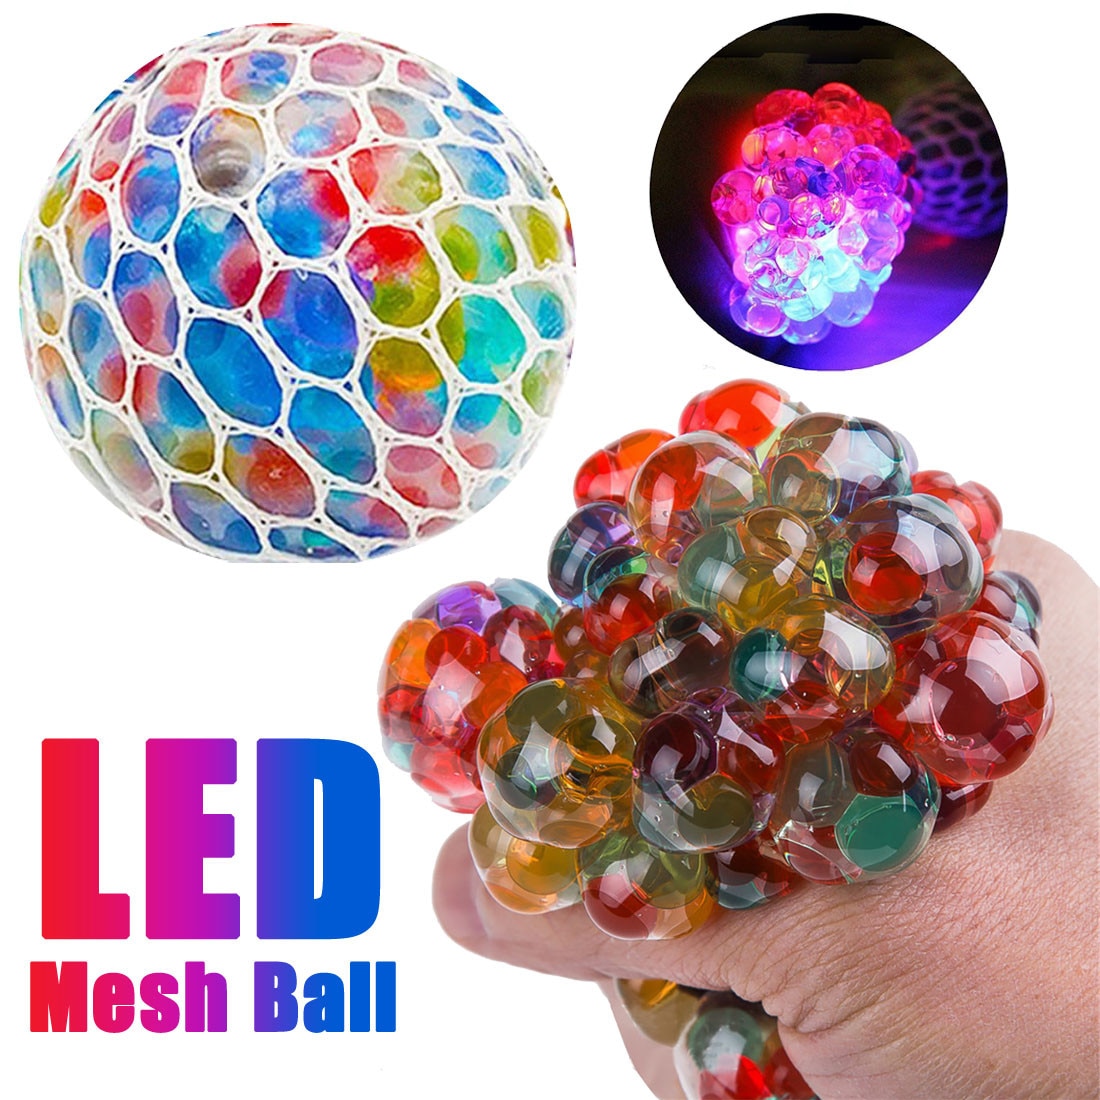 Kinderen Grappig Speelgoed Anti Stress Mesh Ball Stress Led Gloeiende Squeeze Druif Speelgoed Angst Relief Stress Bal Grappige # M20